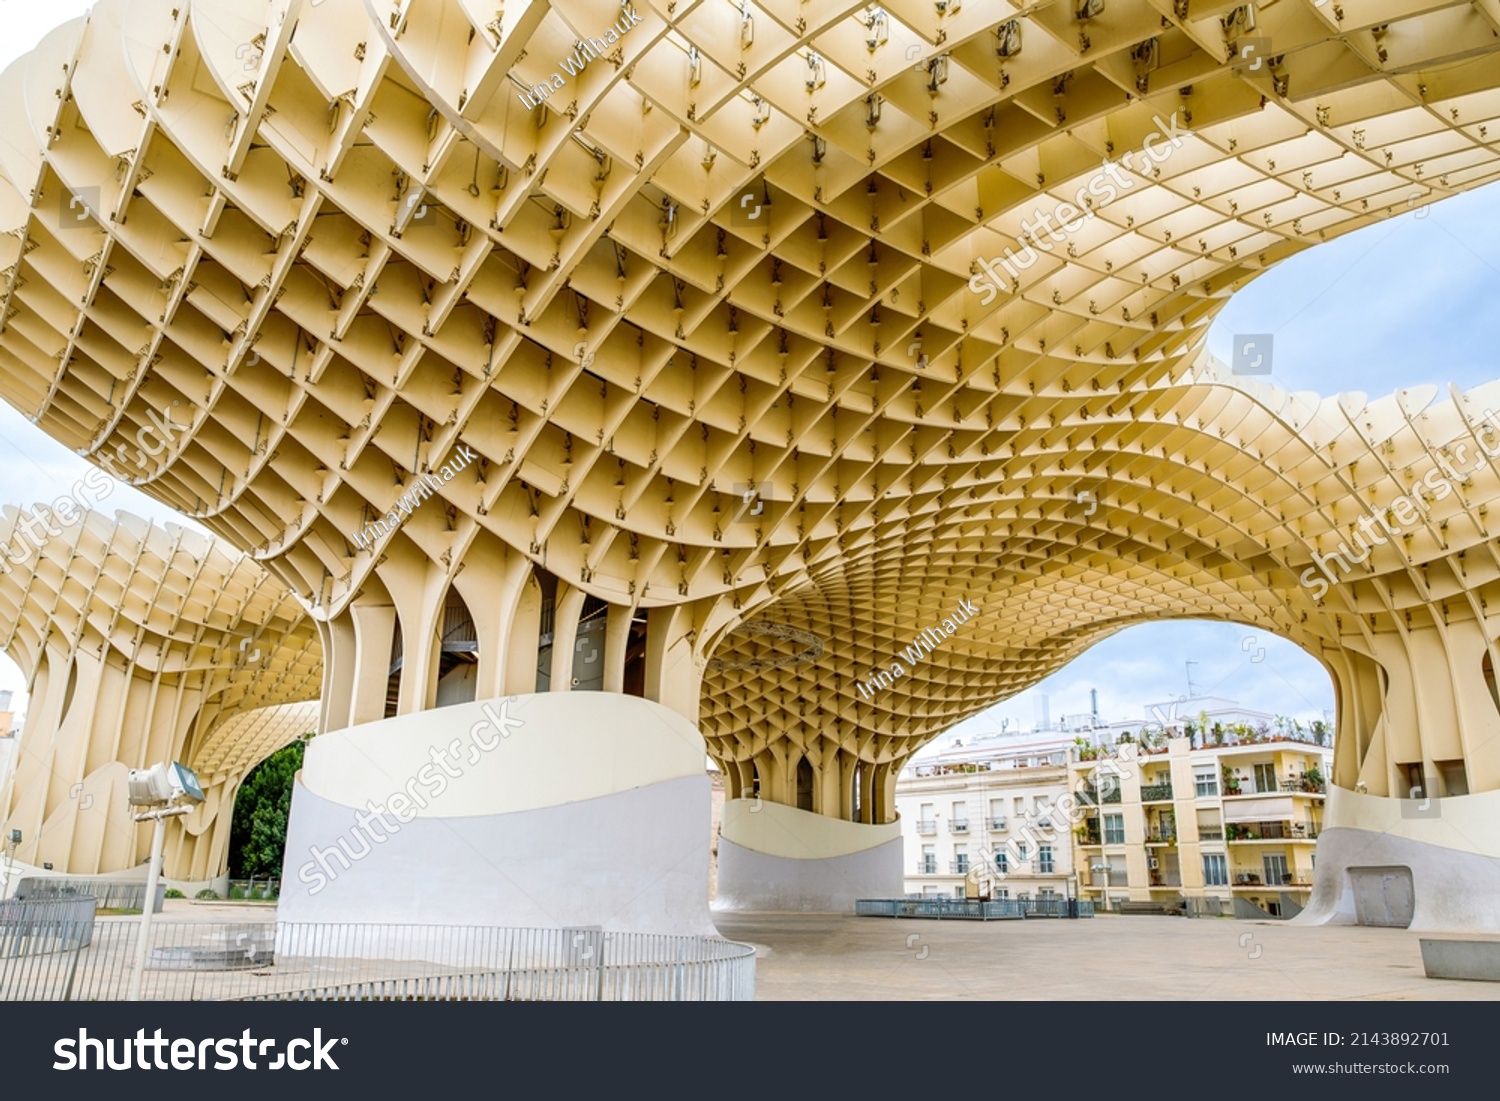 Metropol Parasol wooden structure located in the old quarter of Seville, Spain. Empty place without people #2143892701